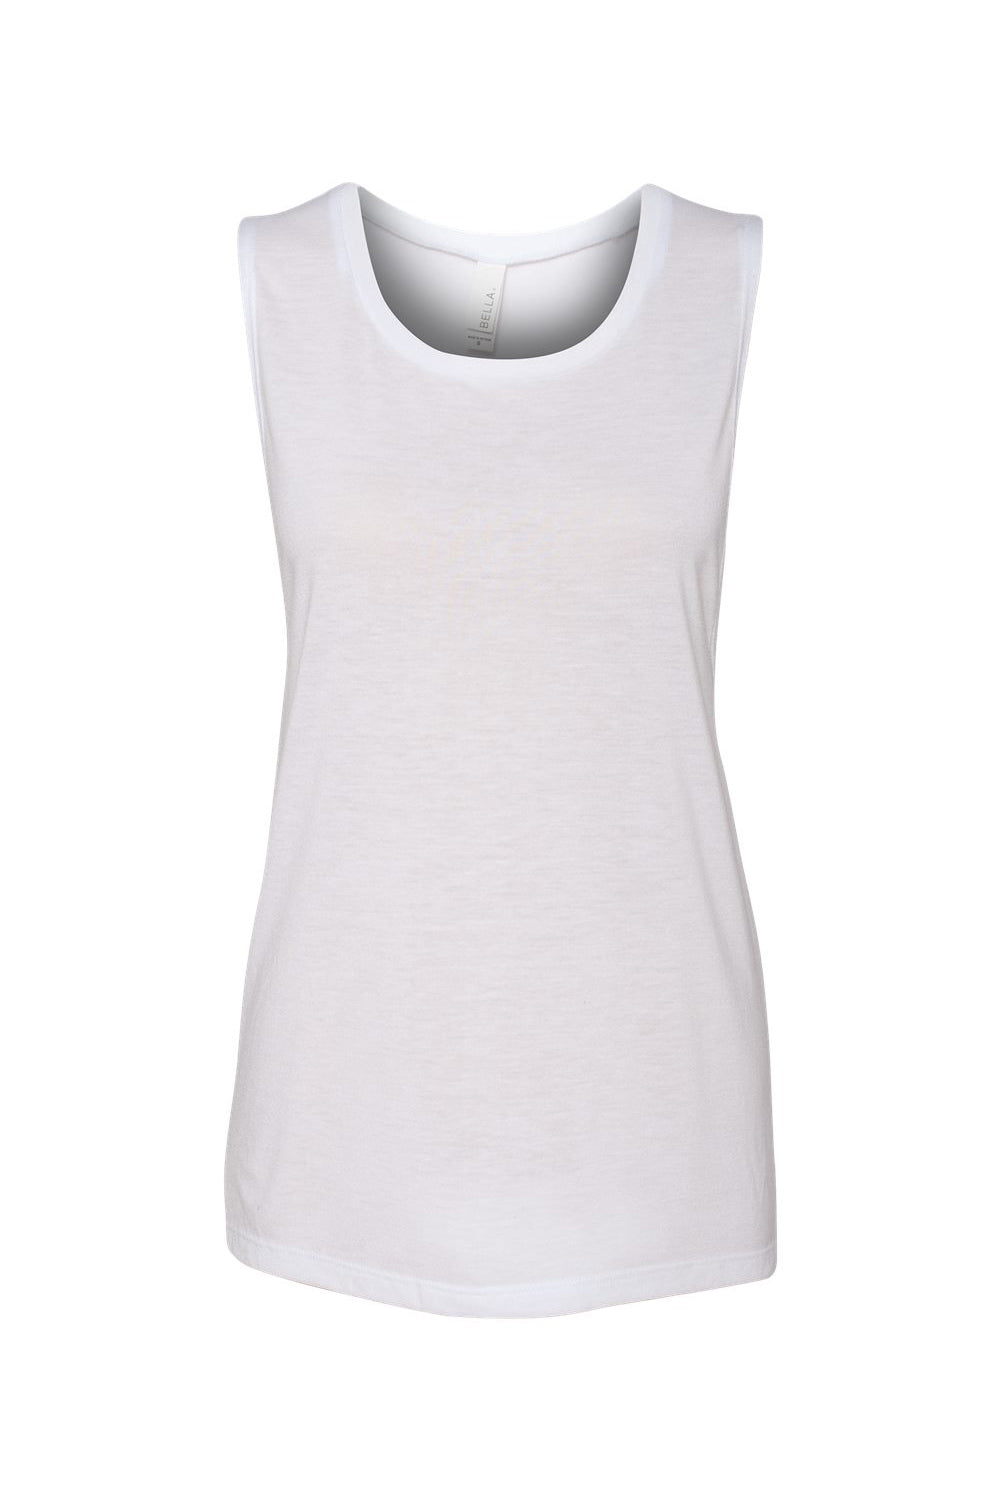 Bella + Canvas BC8803/B8803/8803 Womens Flowy Muscle Tank Top White Flat Front